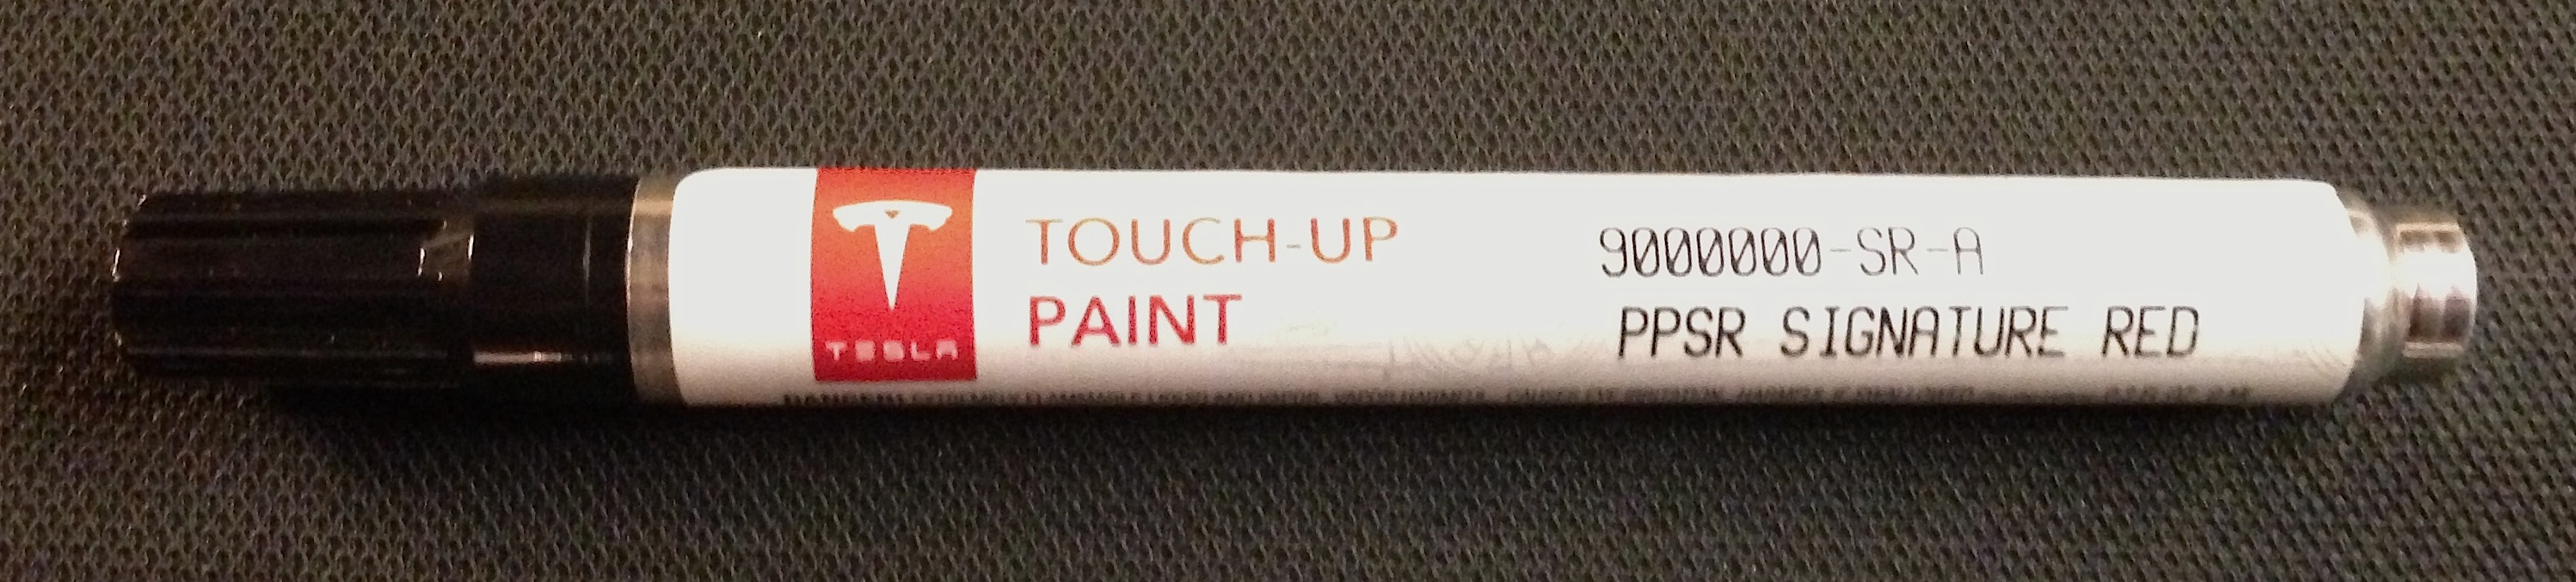 Touch up paint.jpg